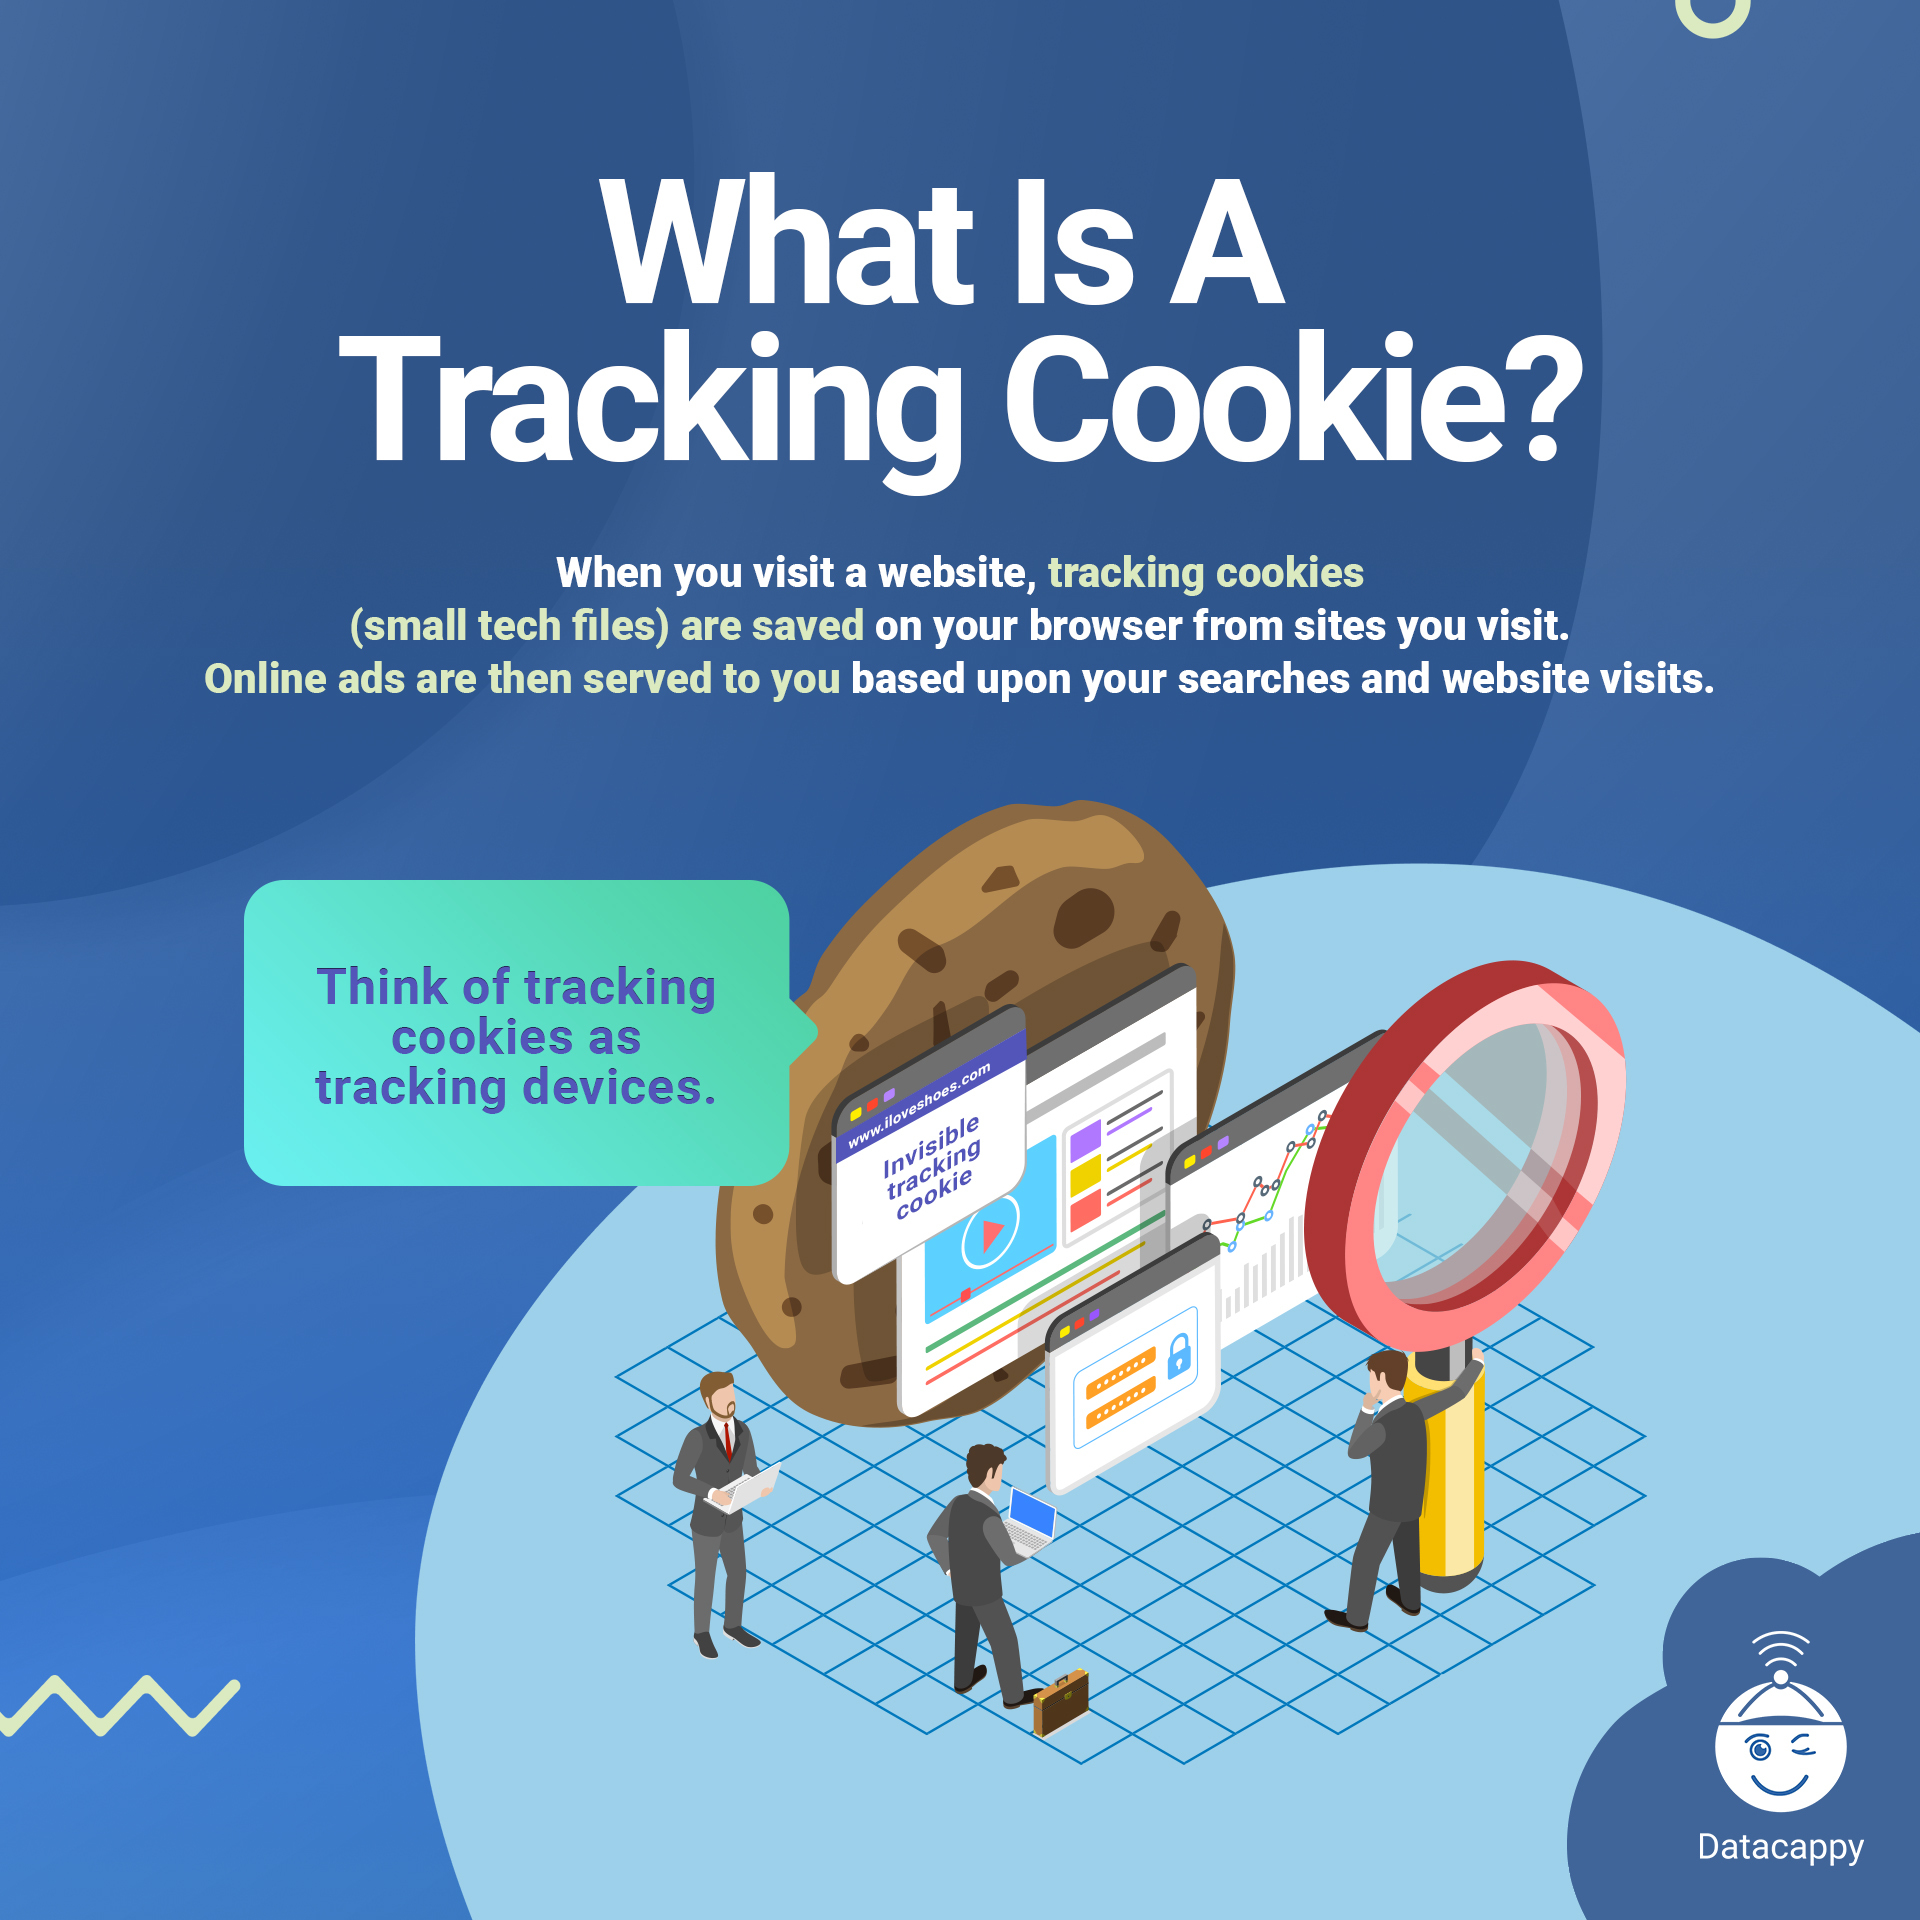 What is a Tracking Cookie?